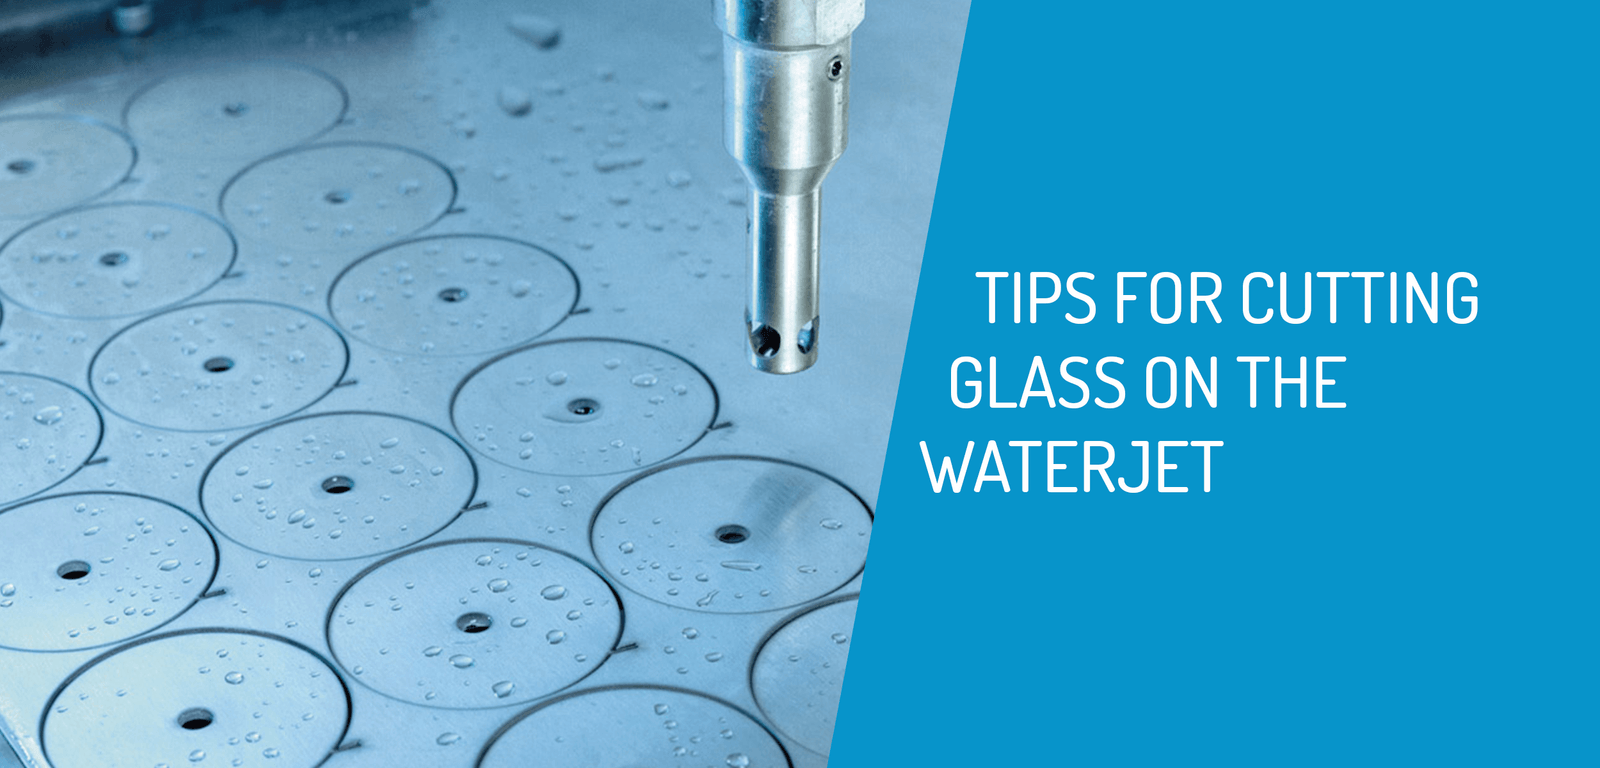 Tips for Piercing Glass on the Waterjet